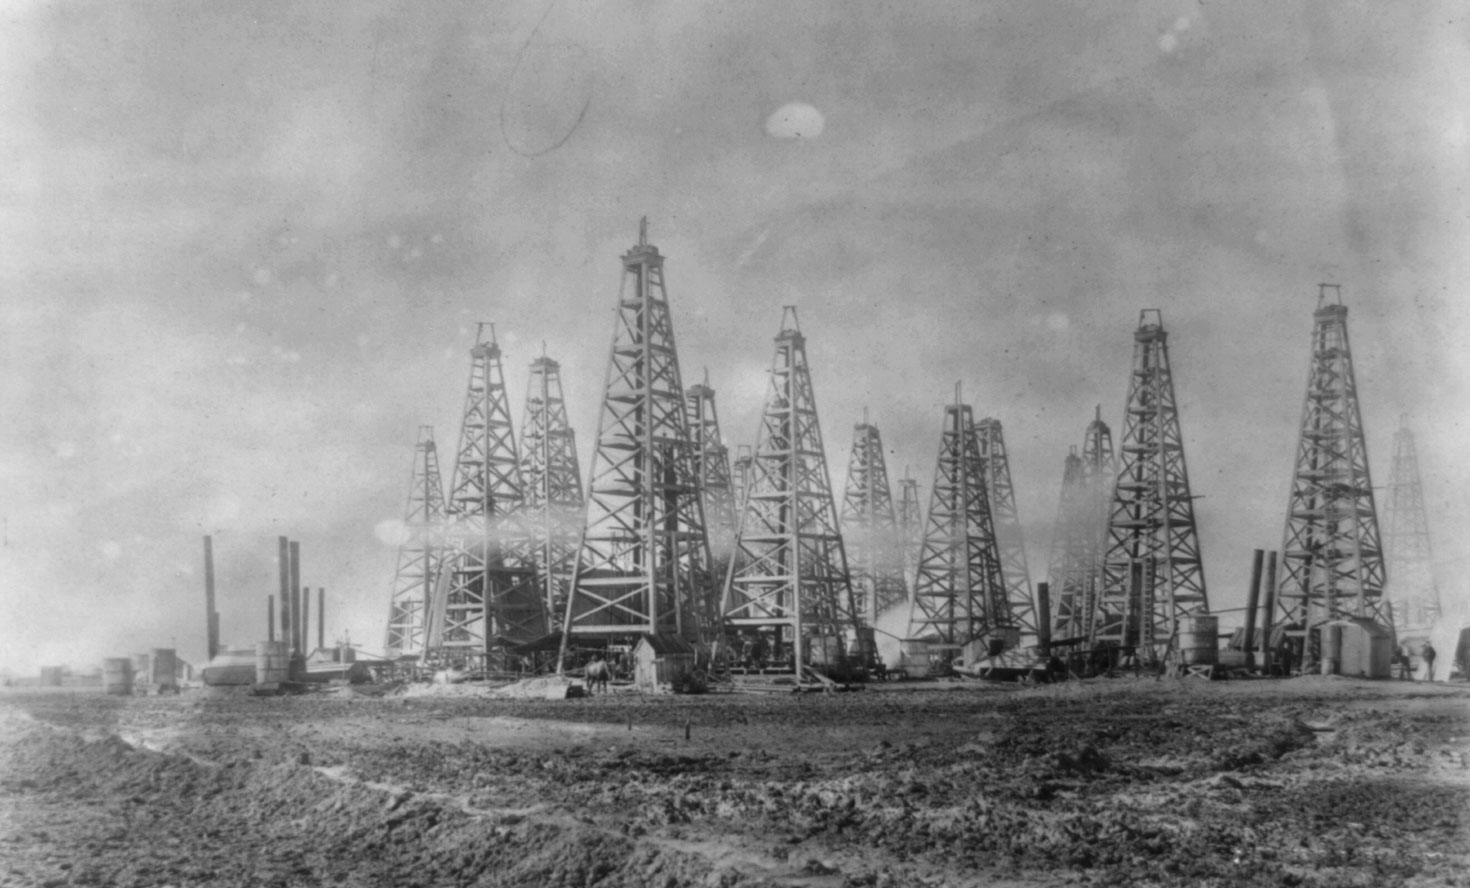 Black-and-white photograph of Spindletop oil field, Beaumont, Porter Arthur, Texas, early 1900s. The oilfield has many wooden derricks.